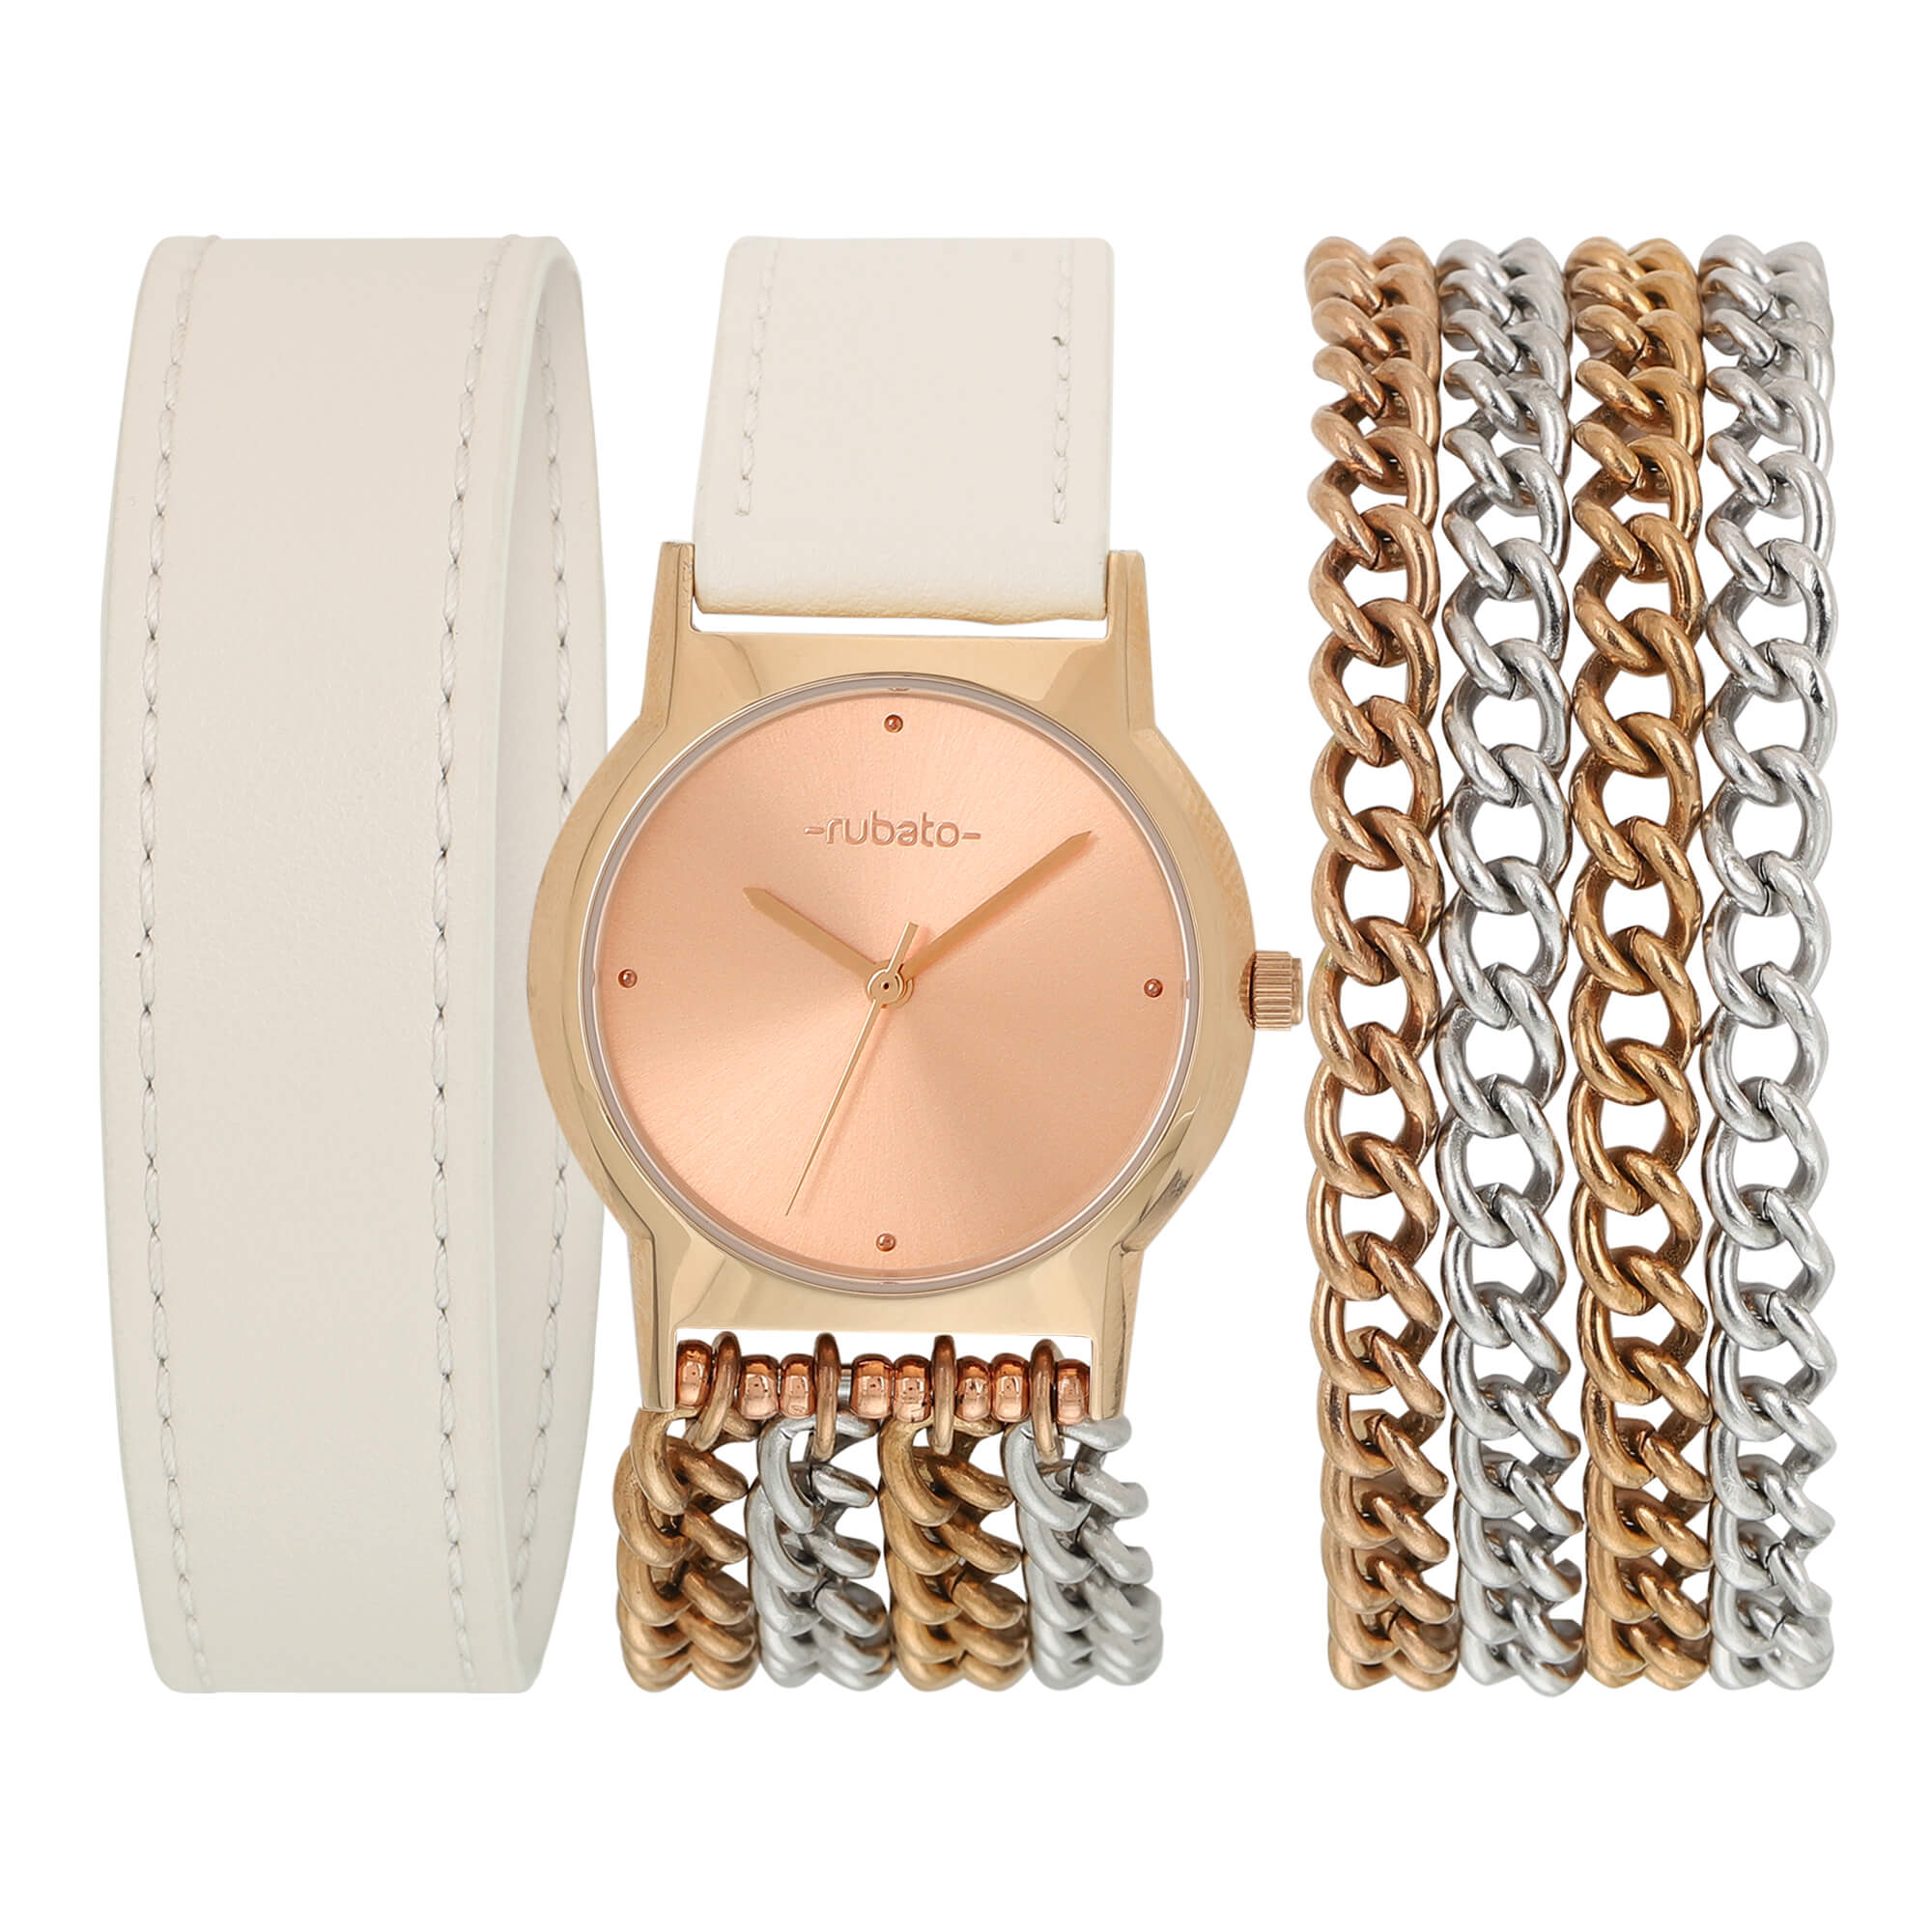 The Dream Wrap - Round Rose Gold - Ivory